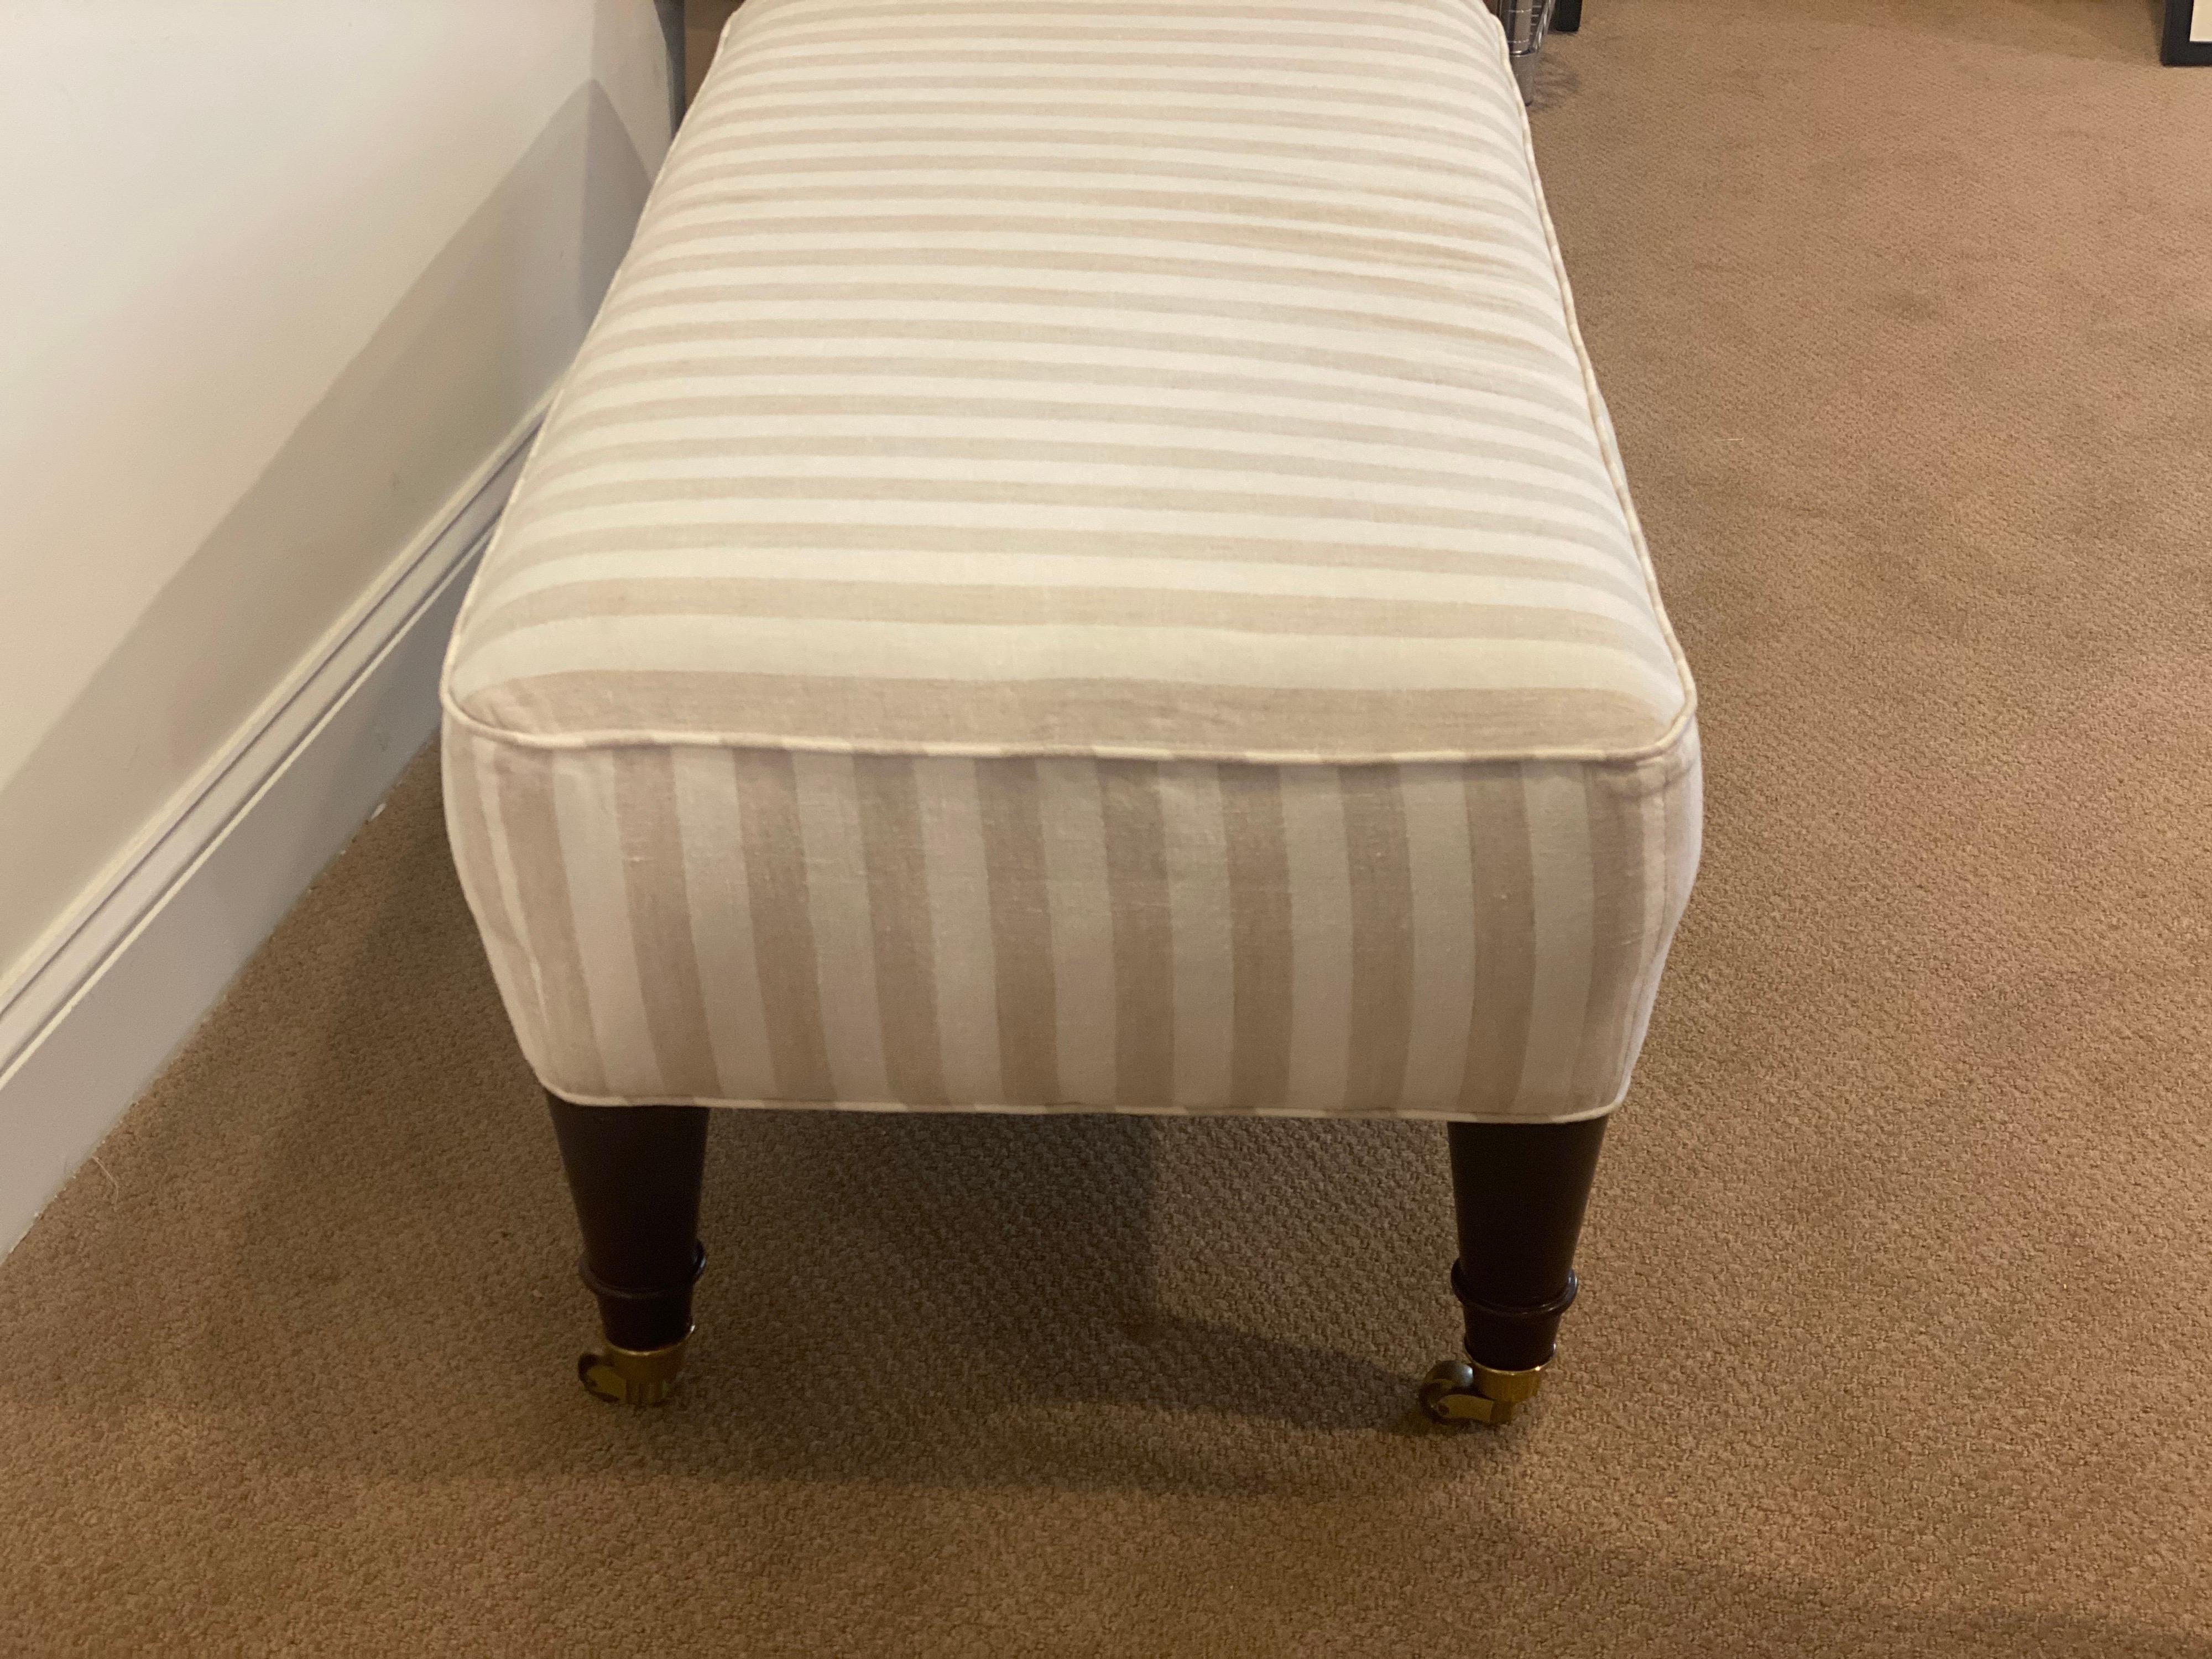 Classic turned taped legs on brass casters with a beige and white stripe fabric. This bench is in great condition, ready to use with only general expected wear to legs.
Measures: 44.25” wide x 21” deep x 17” high.